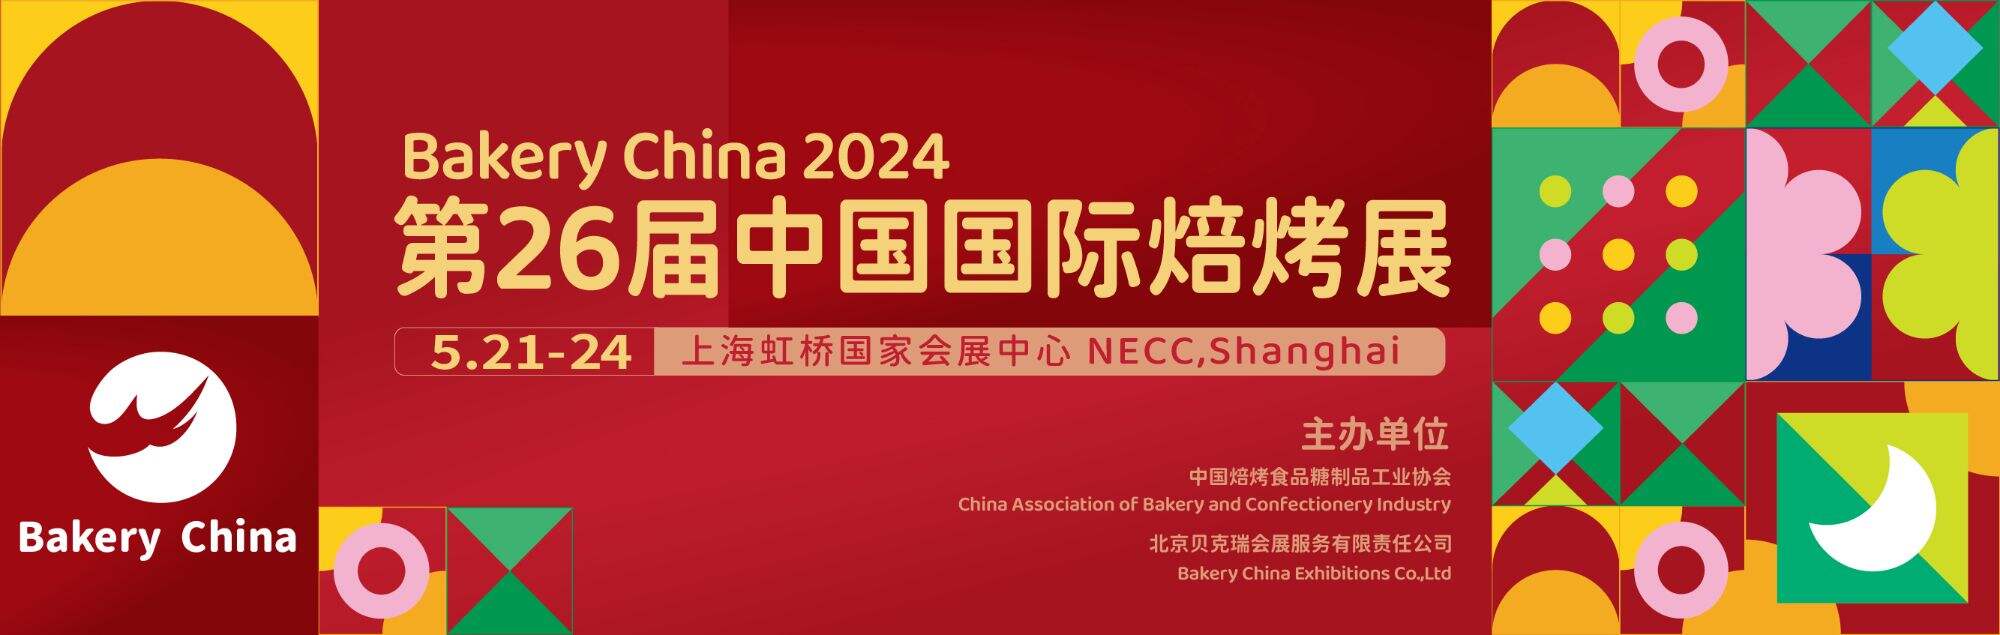 Exhibition Preview:Bakery China 2024 May 21-24 In Shanghai